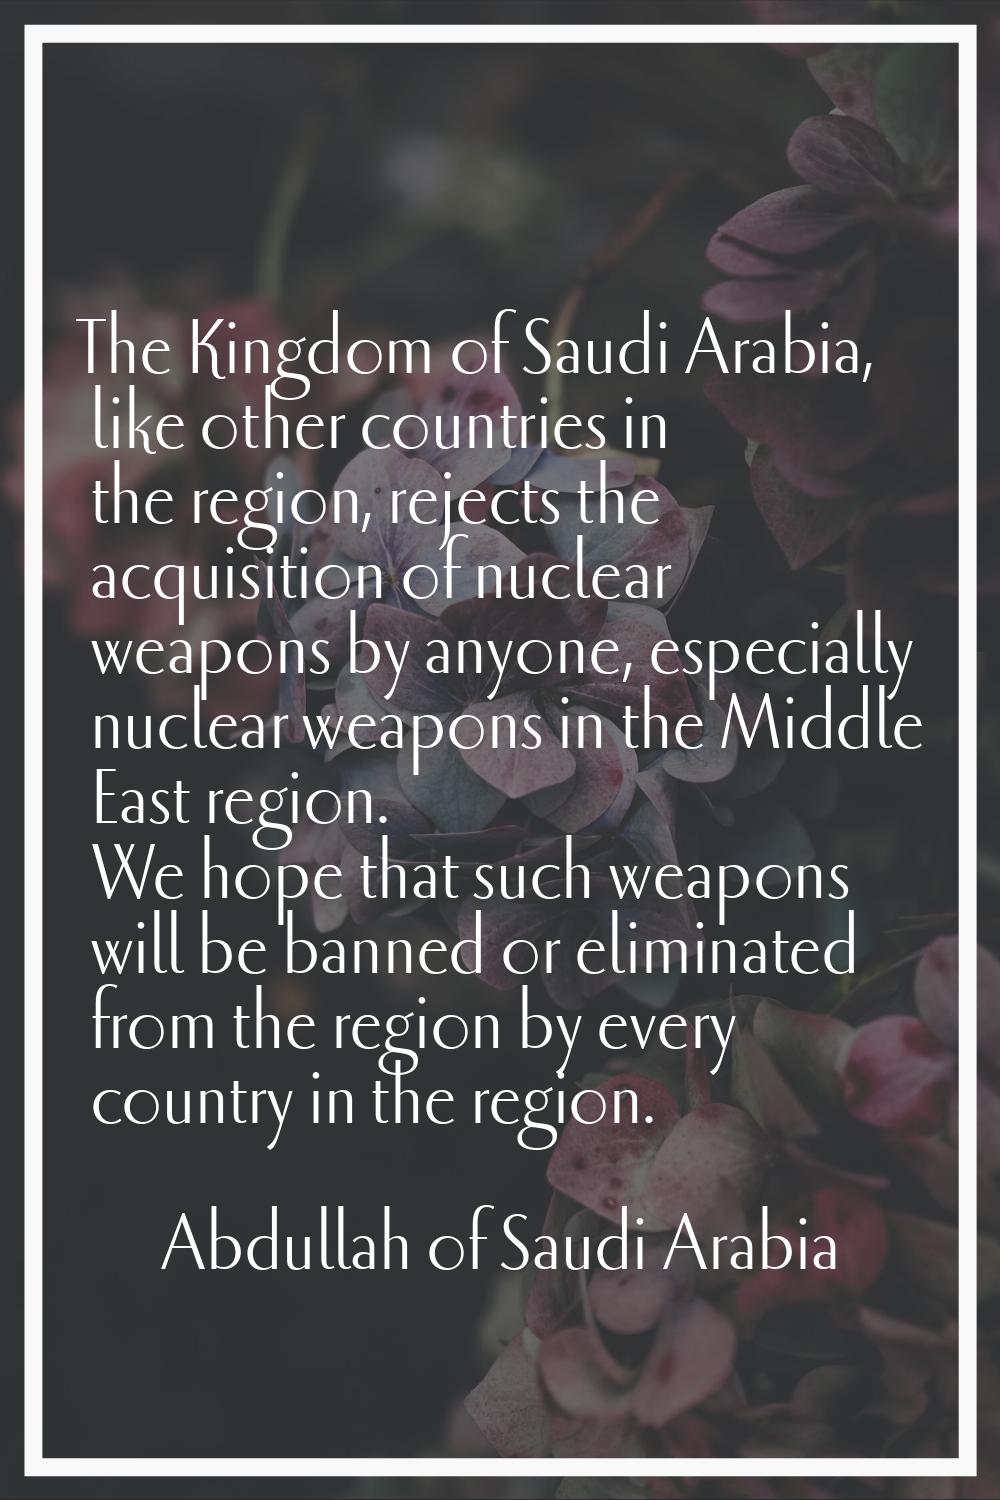 The Kingdom of Saudi Arabia, like other countries in the region, rejects the acquisition of nuclear